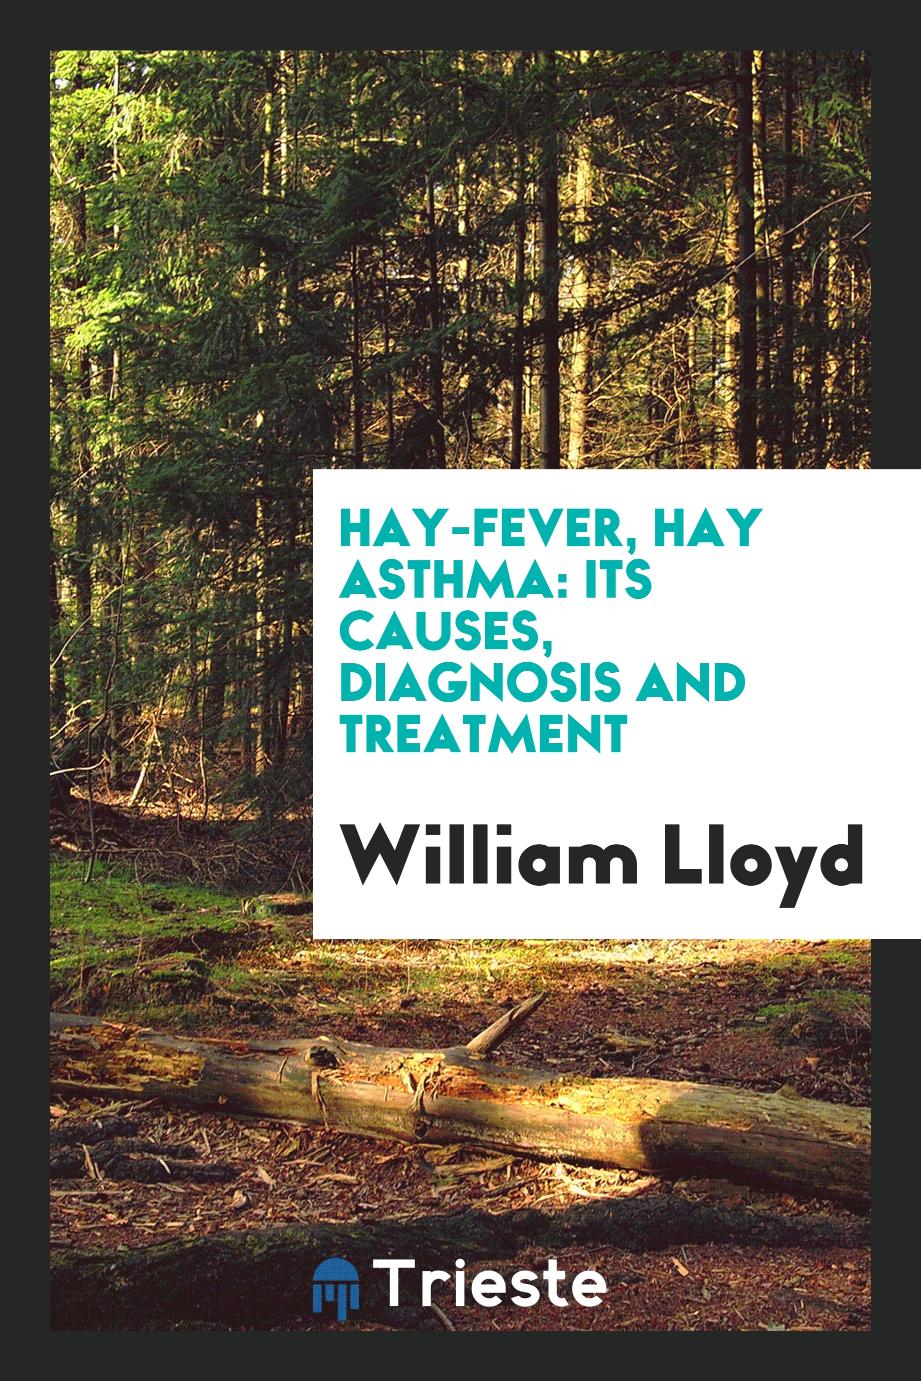 Hay-fever, Hay Asthma: Its Causes, Diagnosis and Treatment